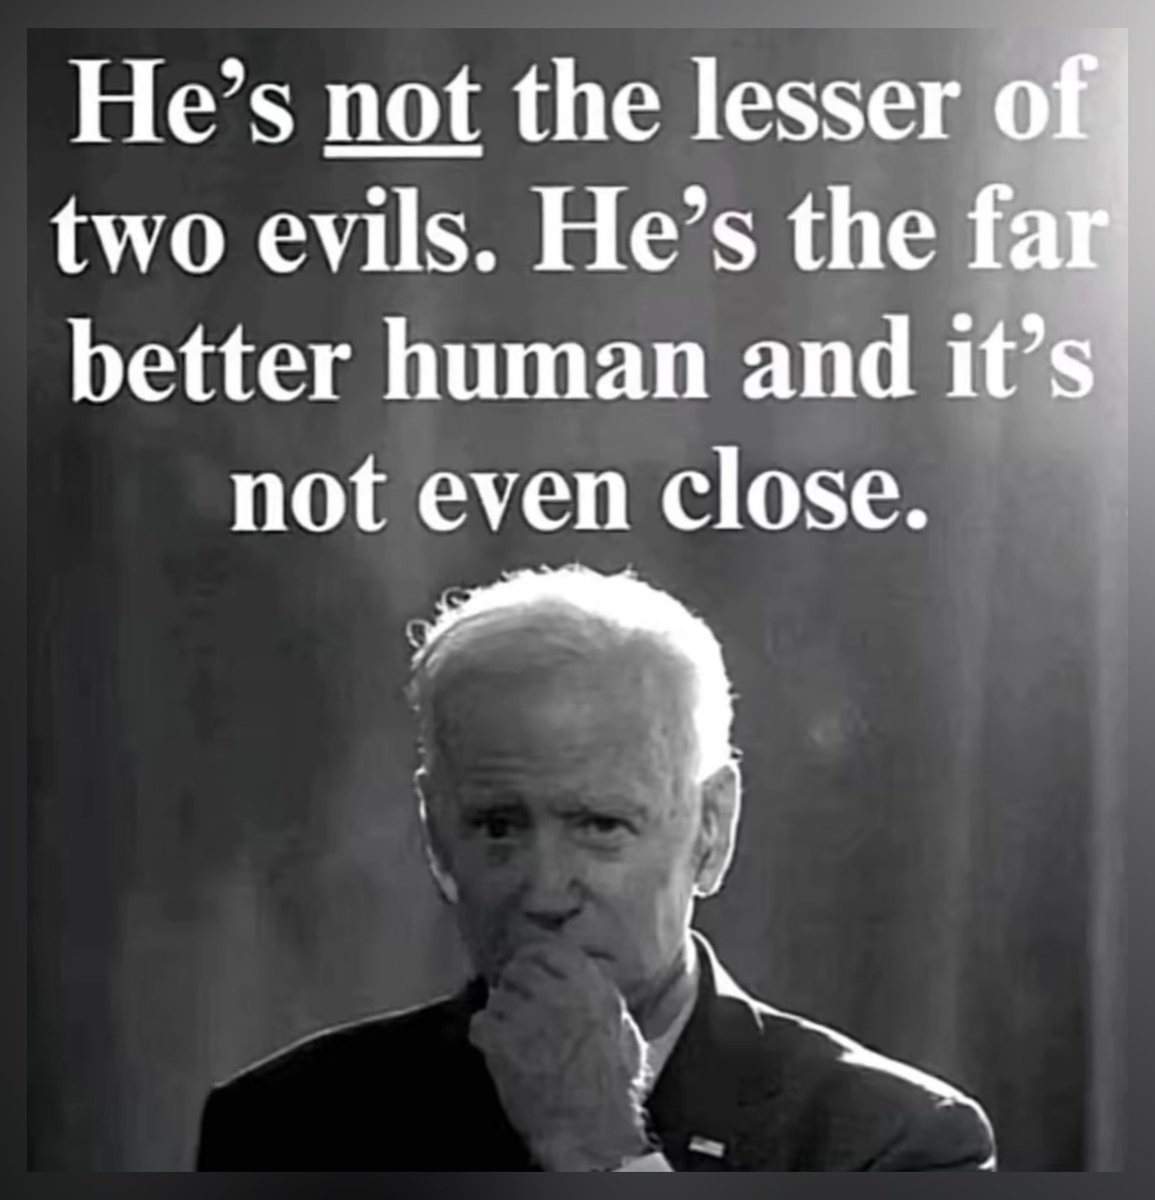 #DemVoice1 #USDemocracy #ProudBlue Joe Biden isn’t a perfect man. He’s an authentic soul who leans in and works silently in the midst of chaos. He doesn’t thrive on pomp and circumstance and being a hot air showboat. His satisfaction is derived from seeing the American